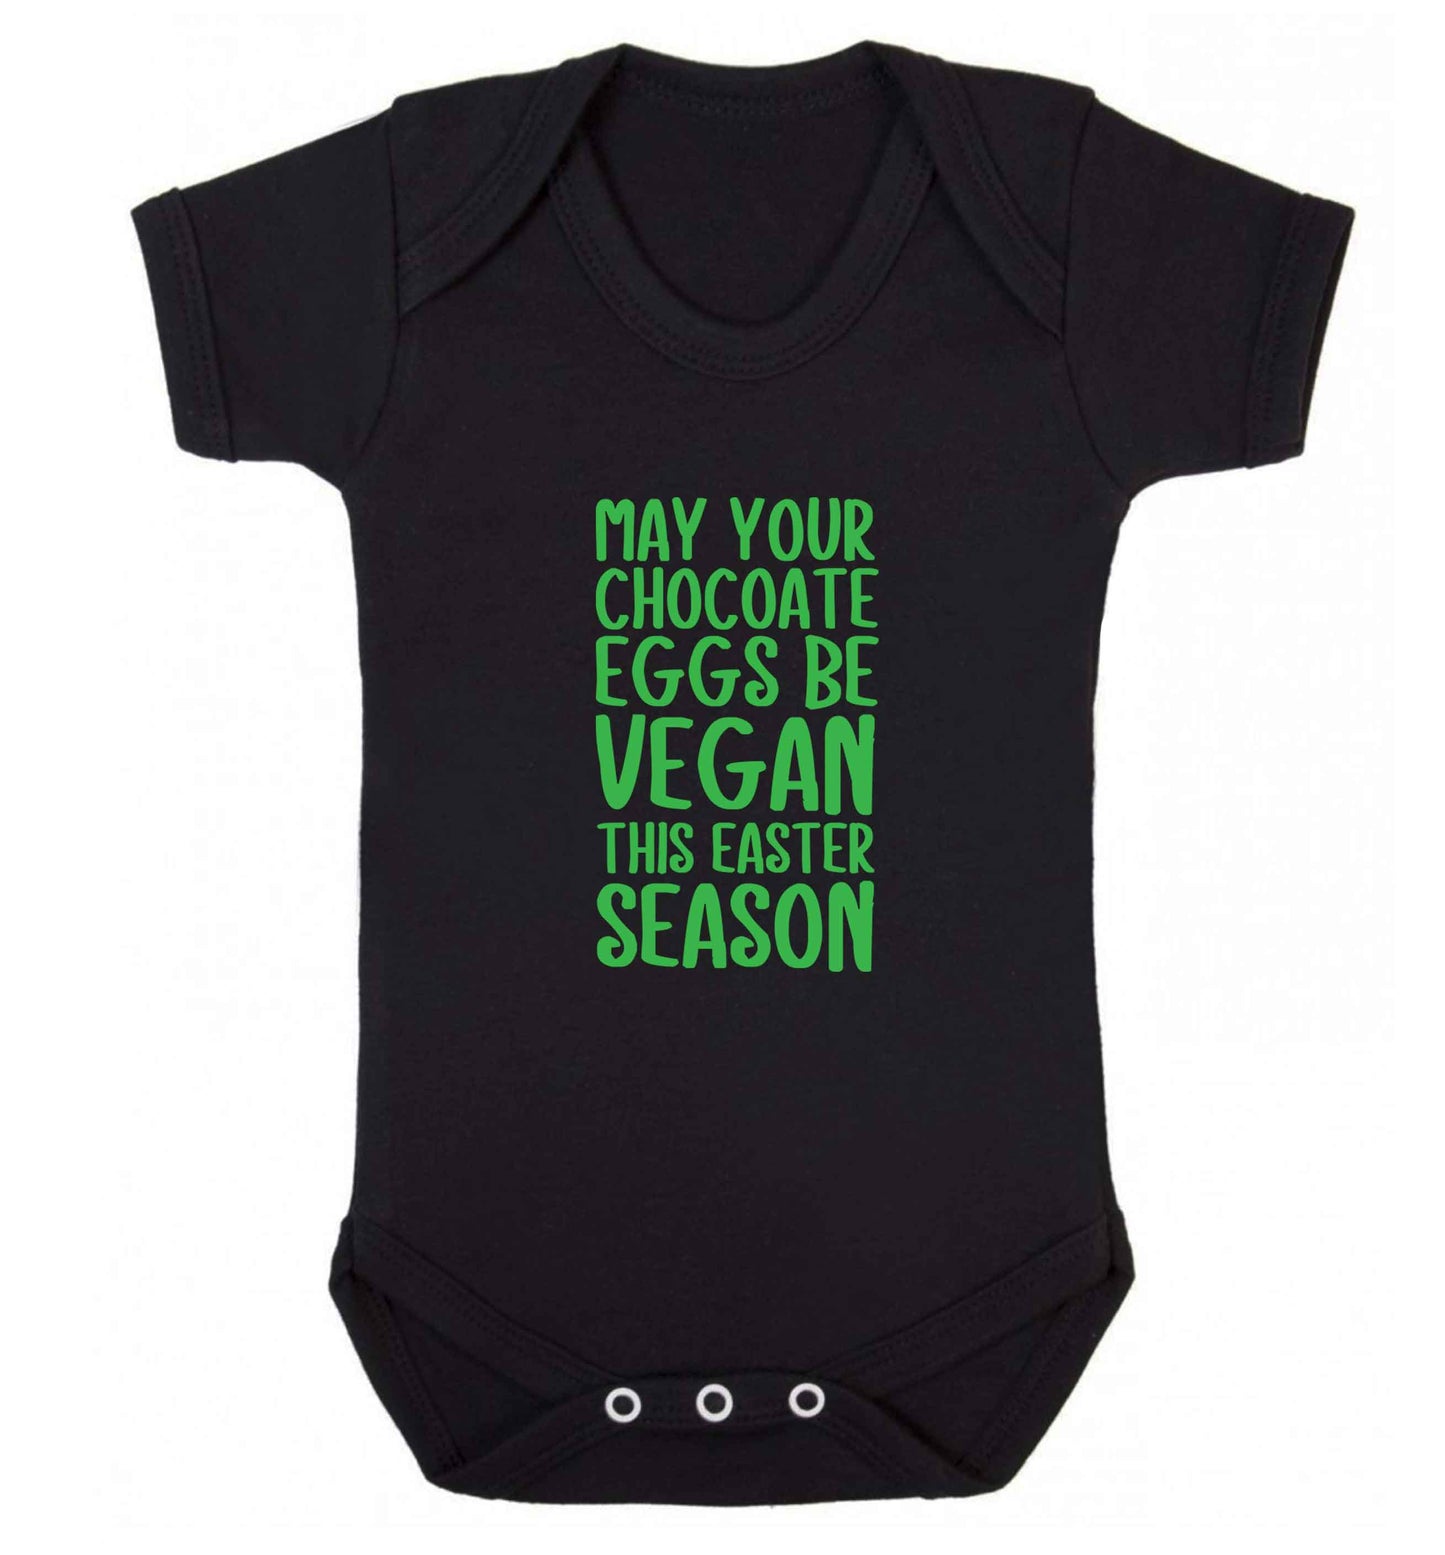 Easter bunny approved! Vegans will love this easter themed baby vest black 18-24 months